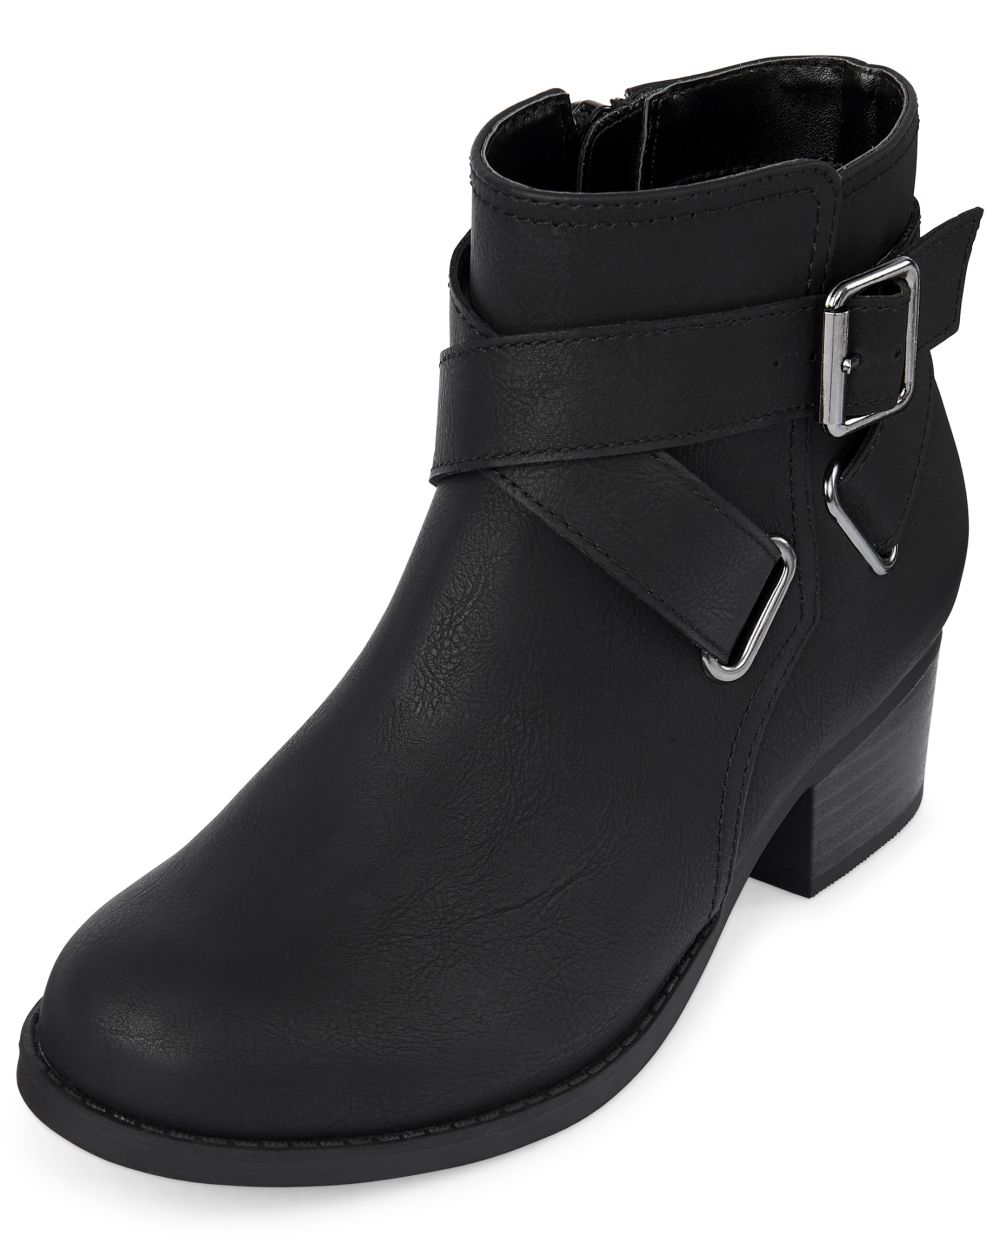 Girls Ankle Strap Faux Leather Booties